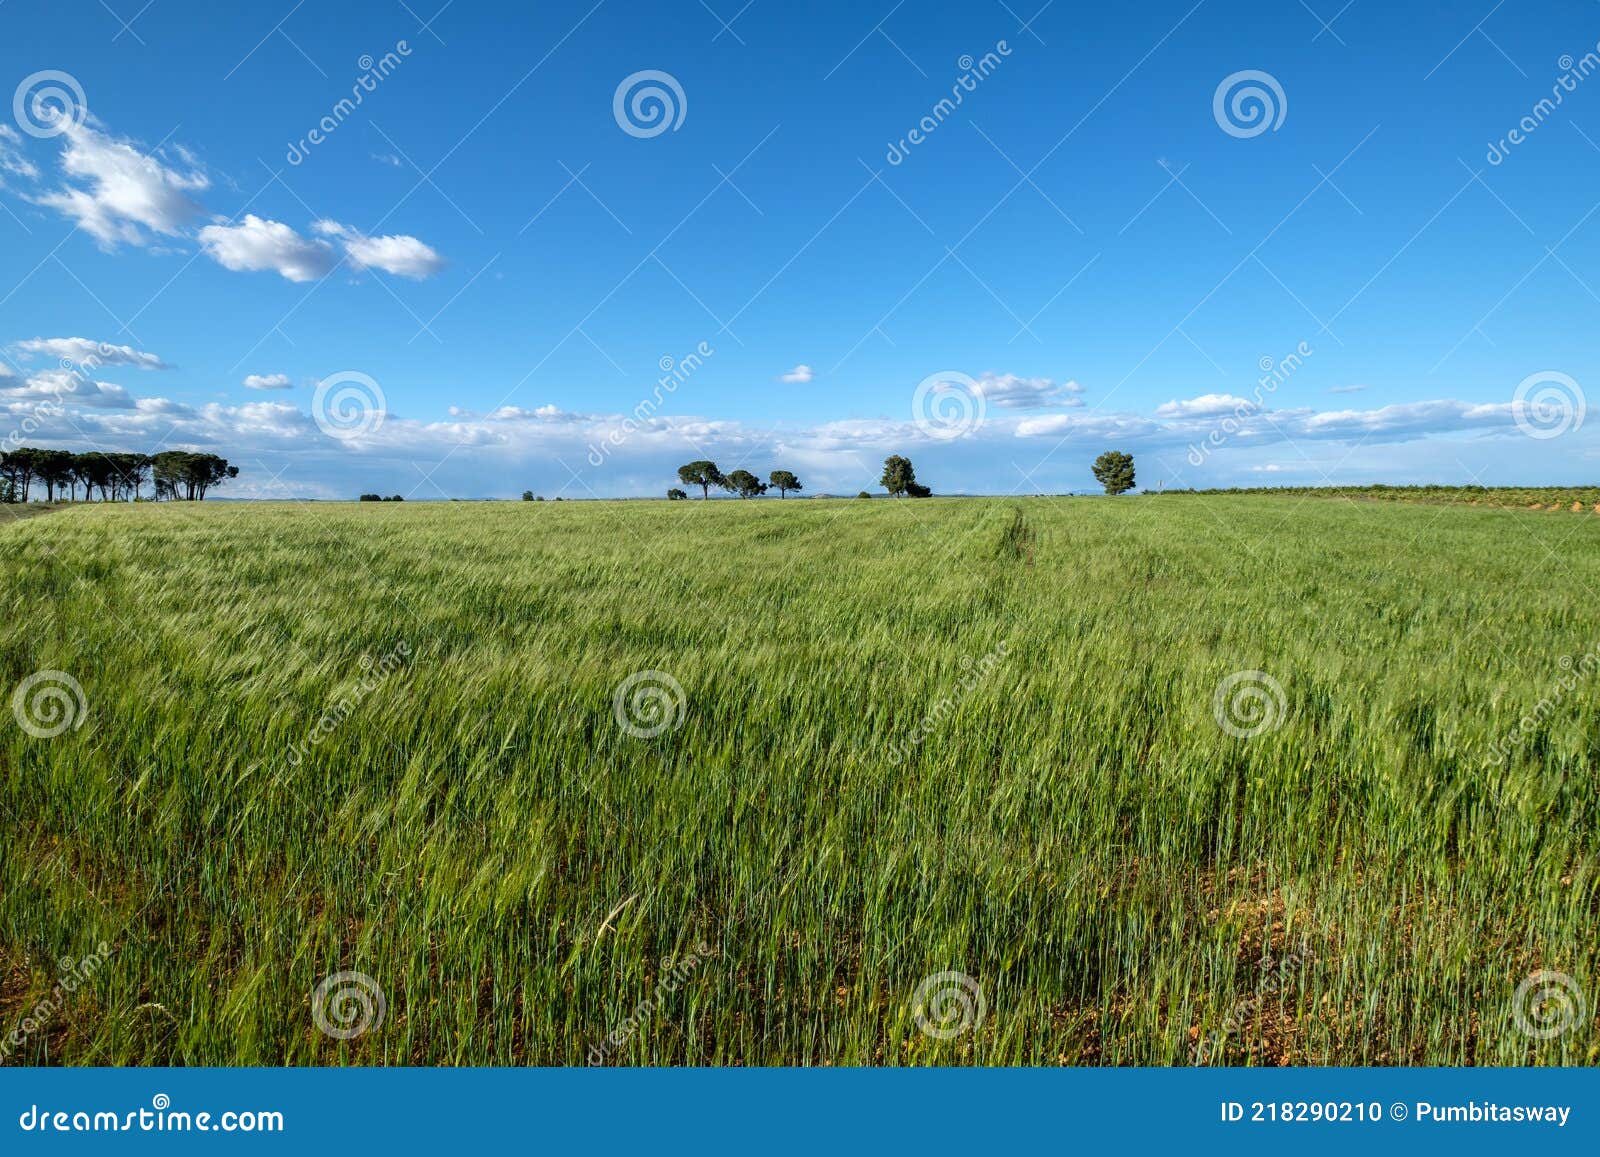 Green Wheat Field And Cloudy Sky Stock Photo - Image of ...